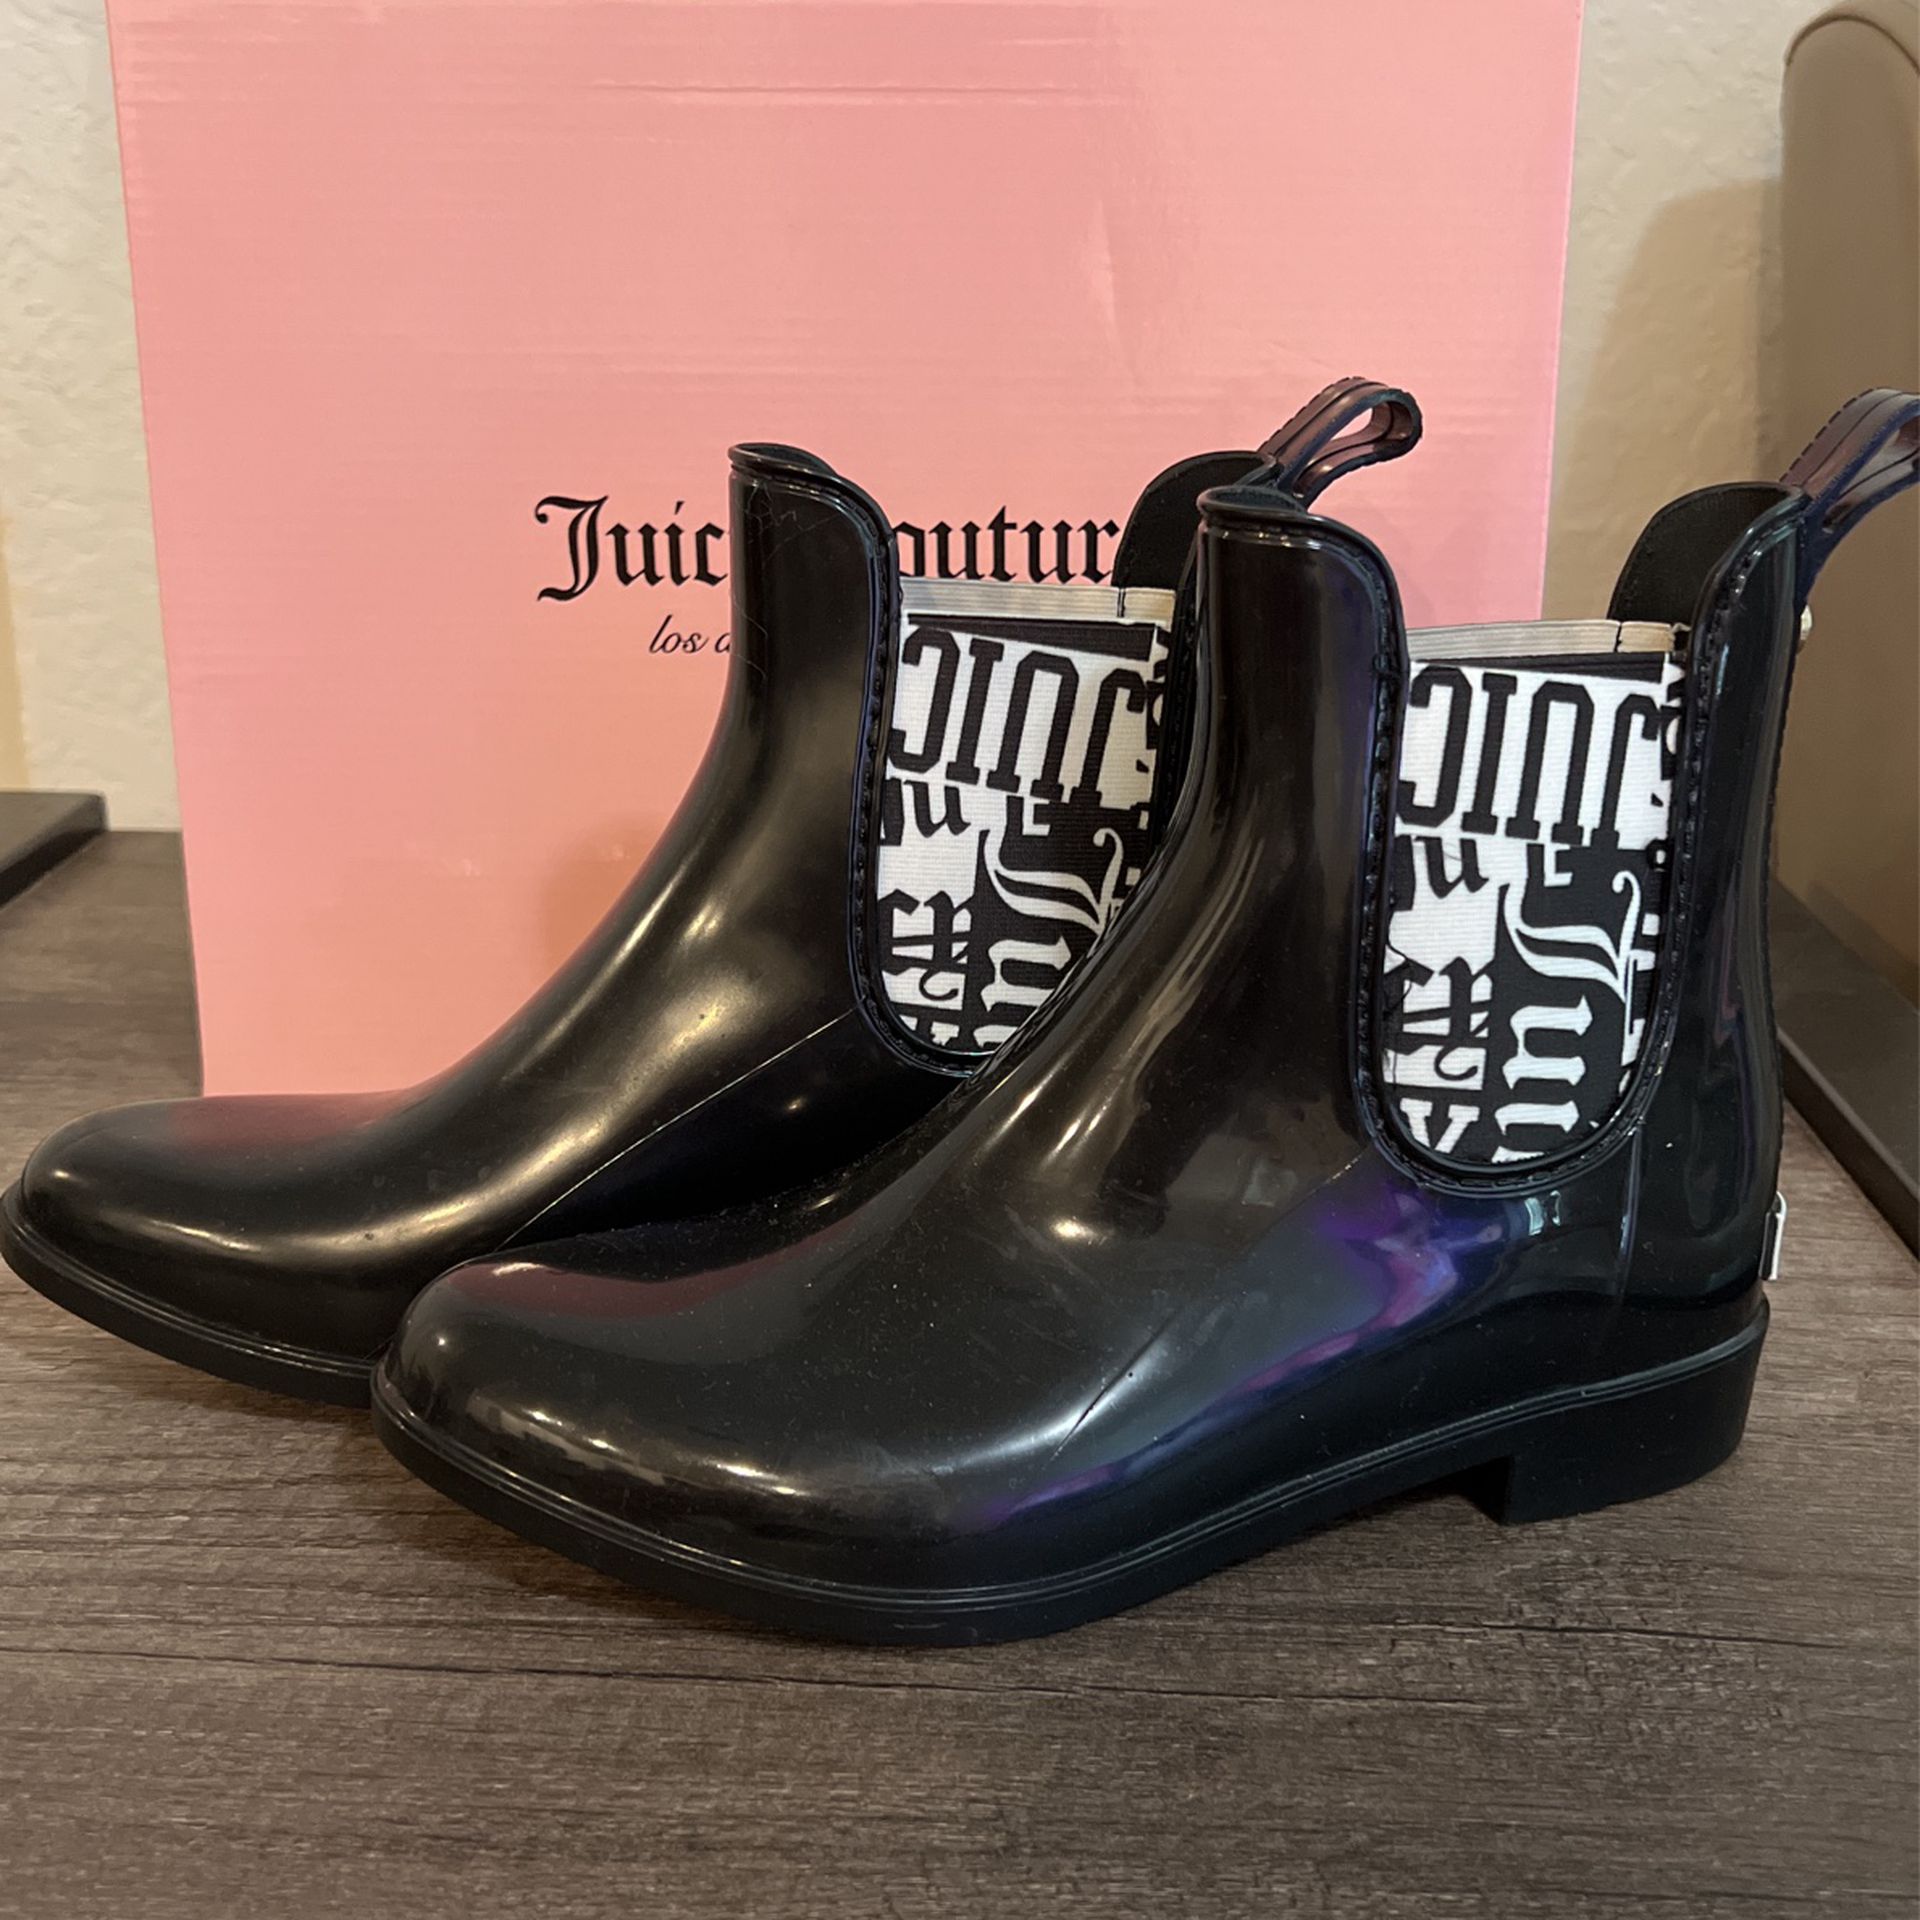 Juicy Couture Rain Boots